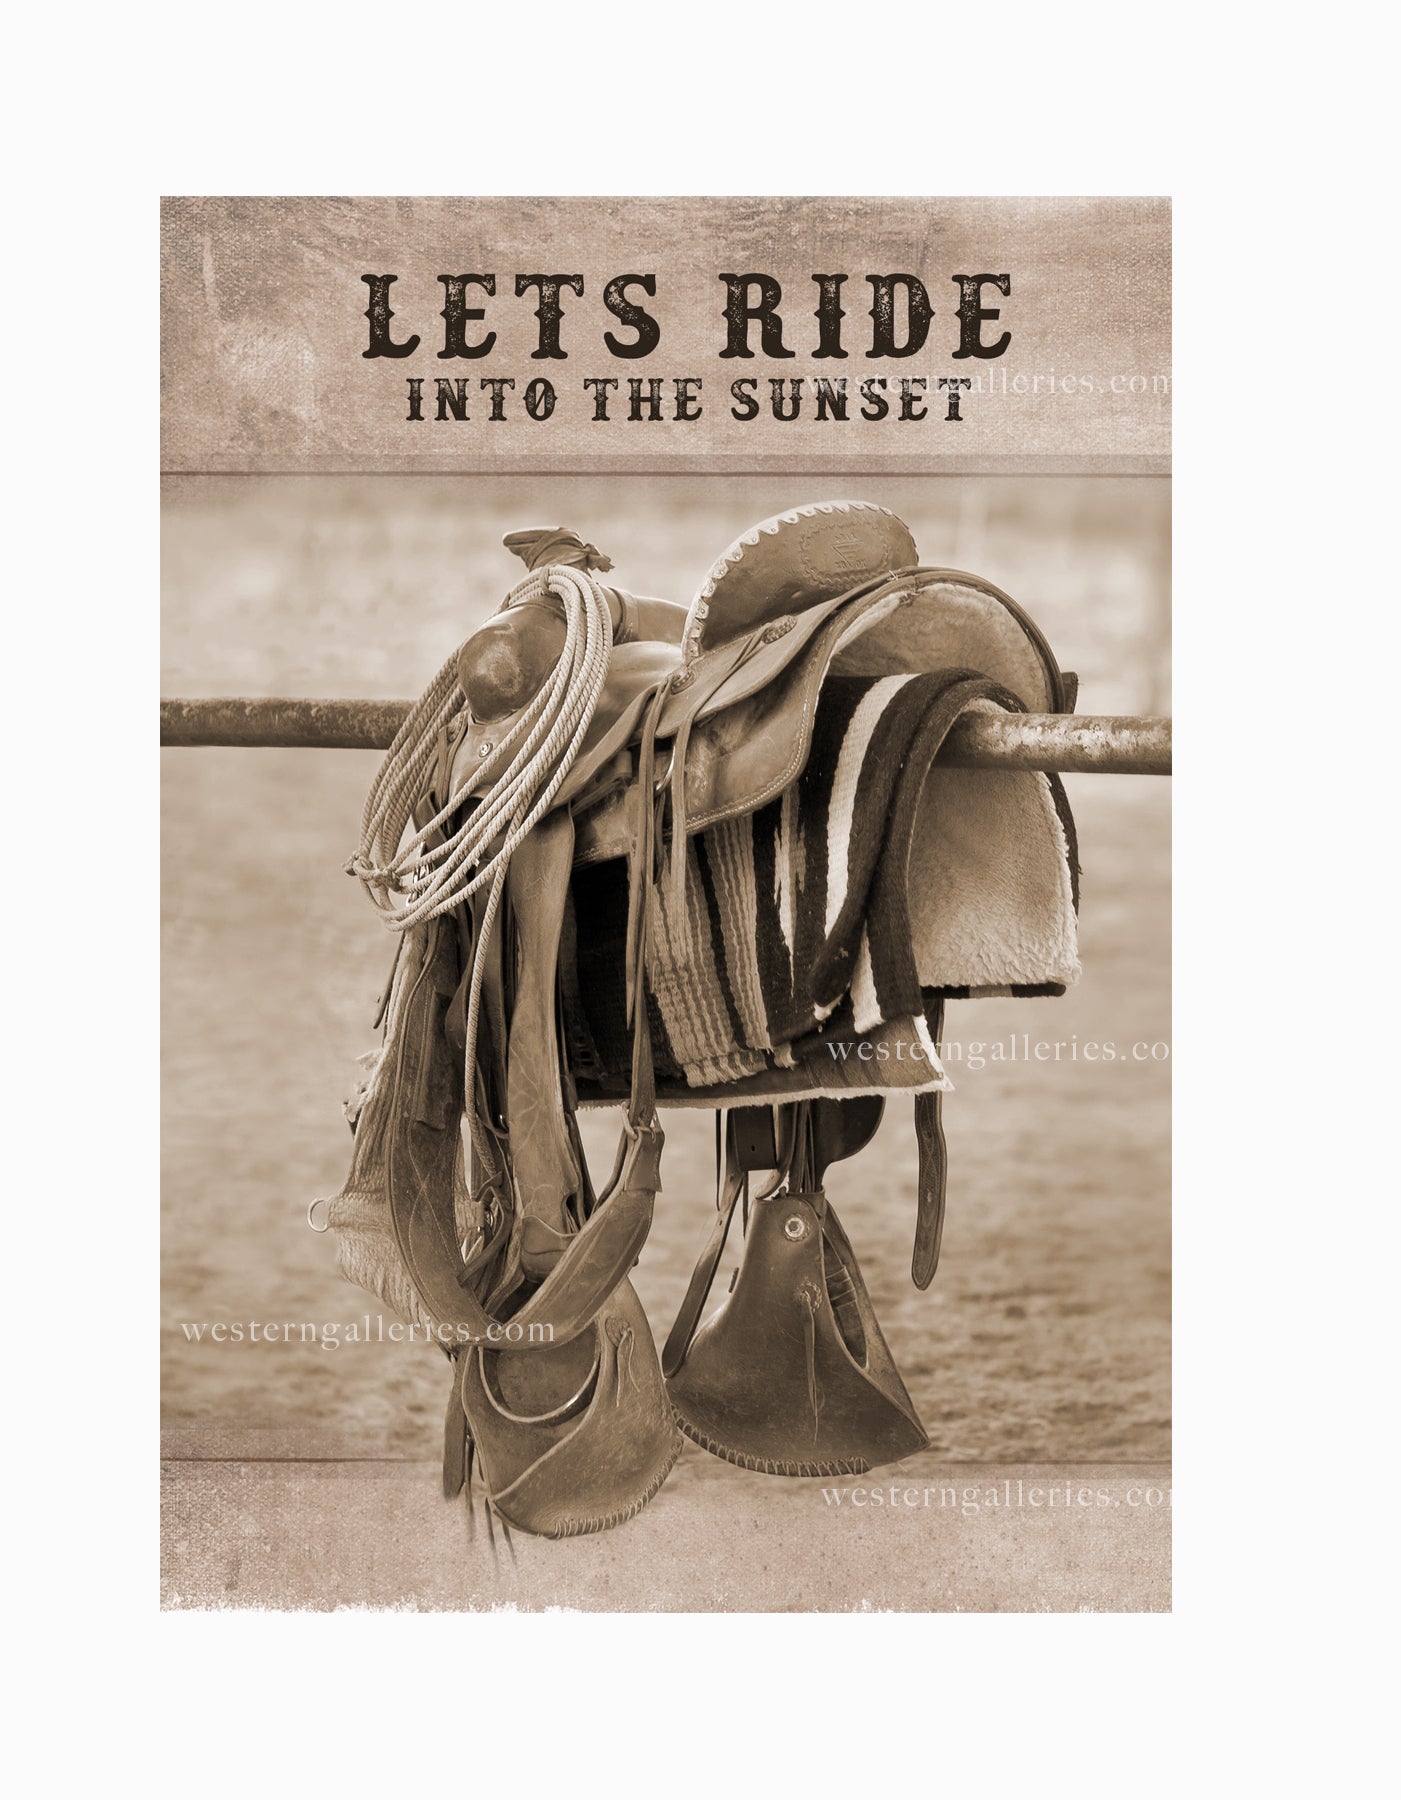 Lets Ride Into the Sunset - Cards, Canvas, Prints, Decor